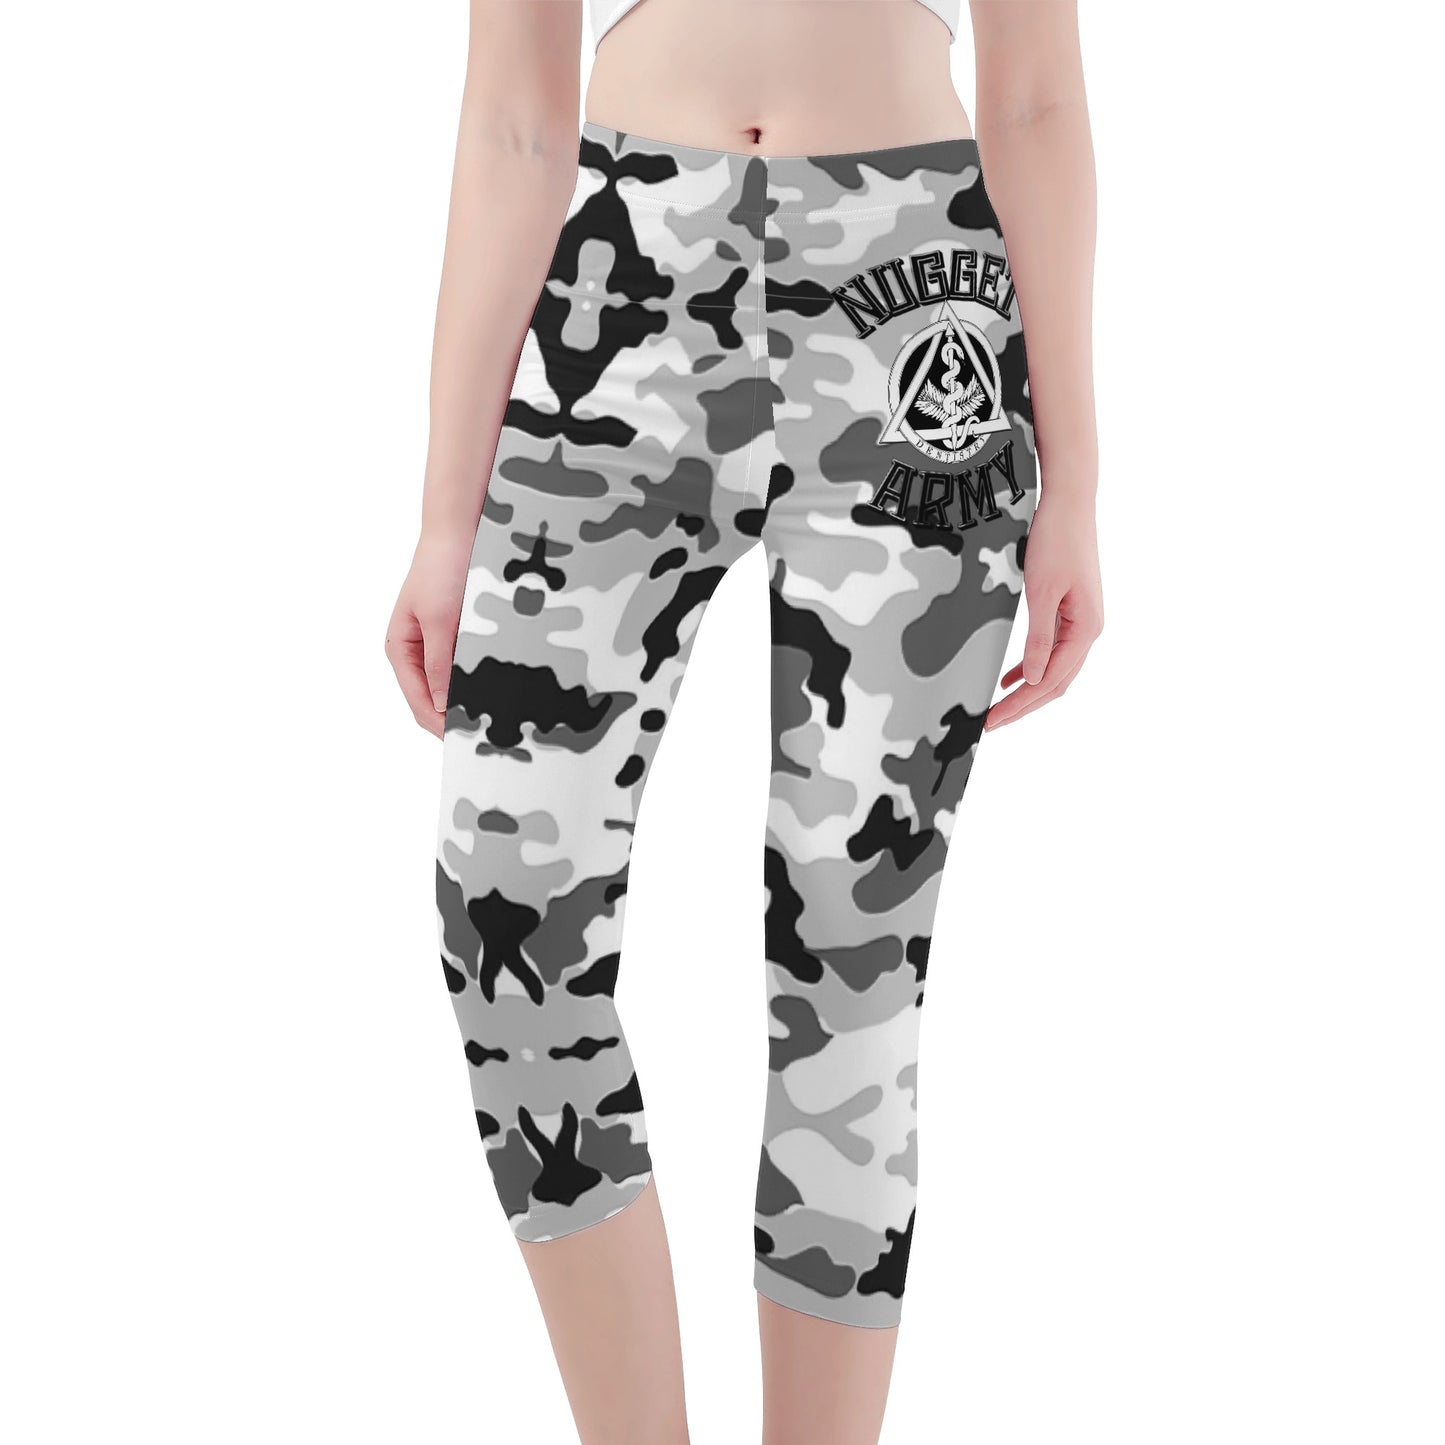 Stand out  with the  Nugget Army Dental Womens Capris  available at Hey Nugget. Grab yours today!